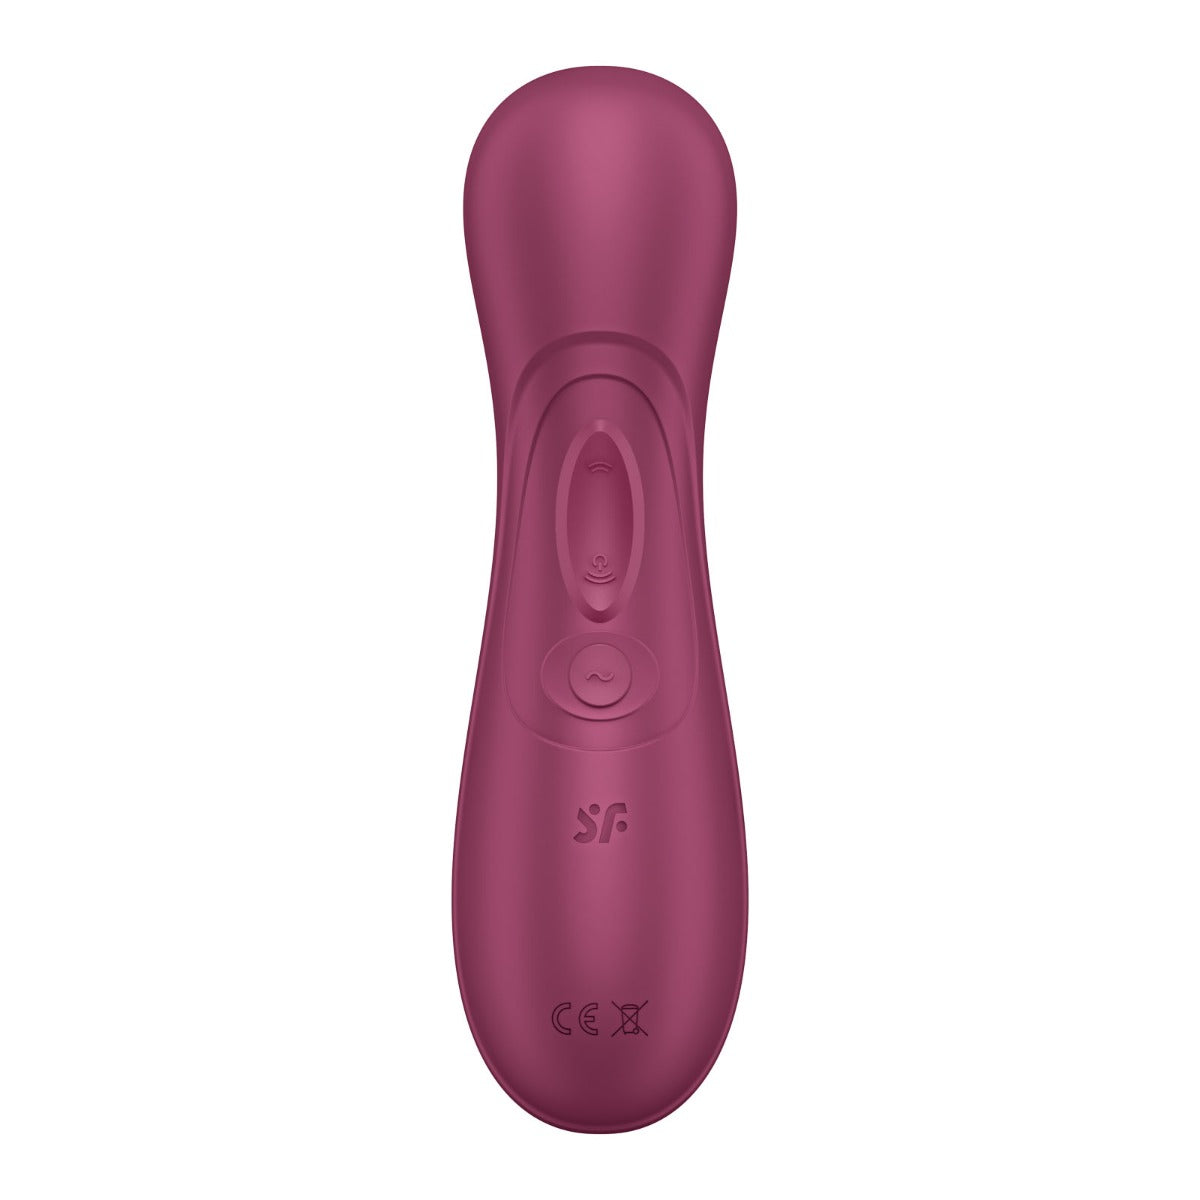 Satisfyer | Pro 2 Generation 3 With Liquid Air Technology  Vibration and Bluetooth/App - Wine Red